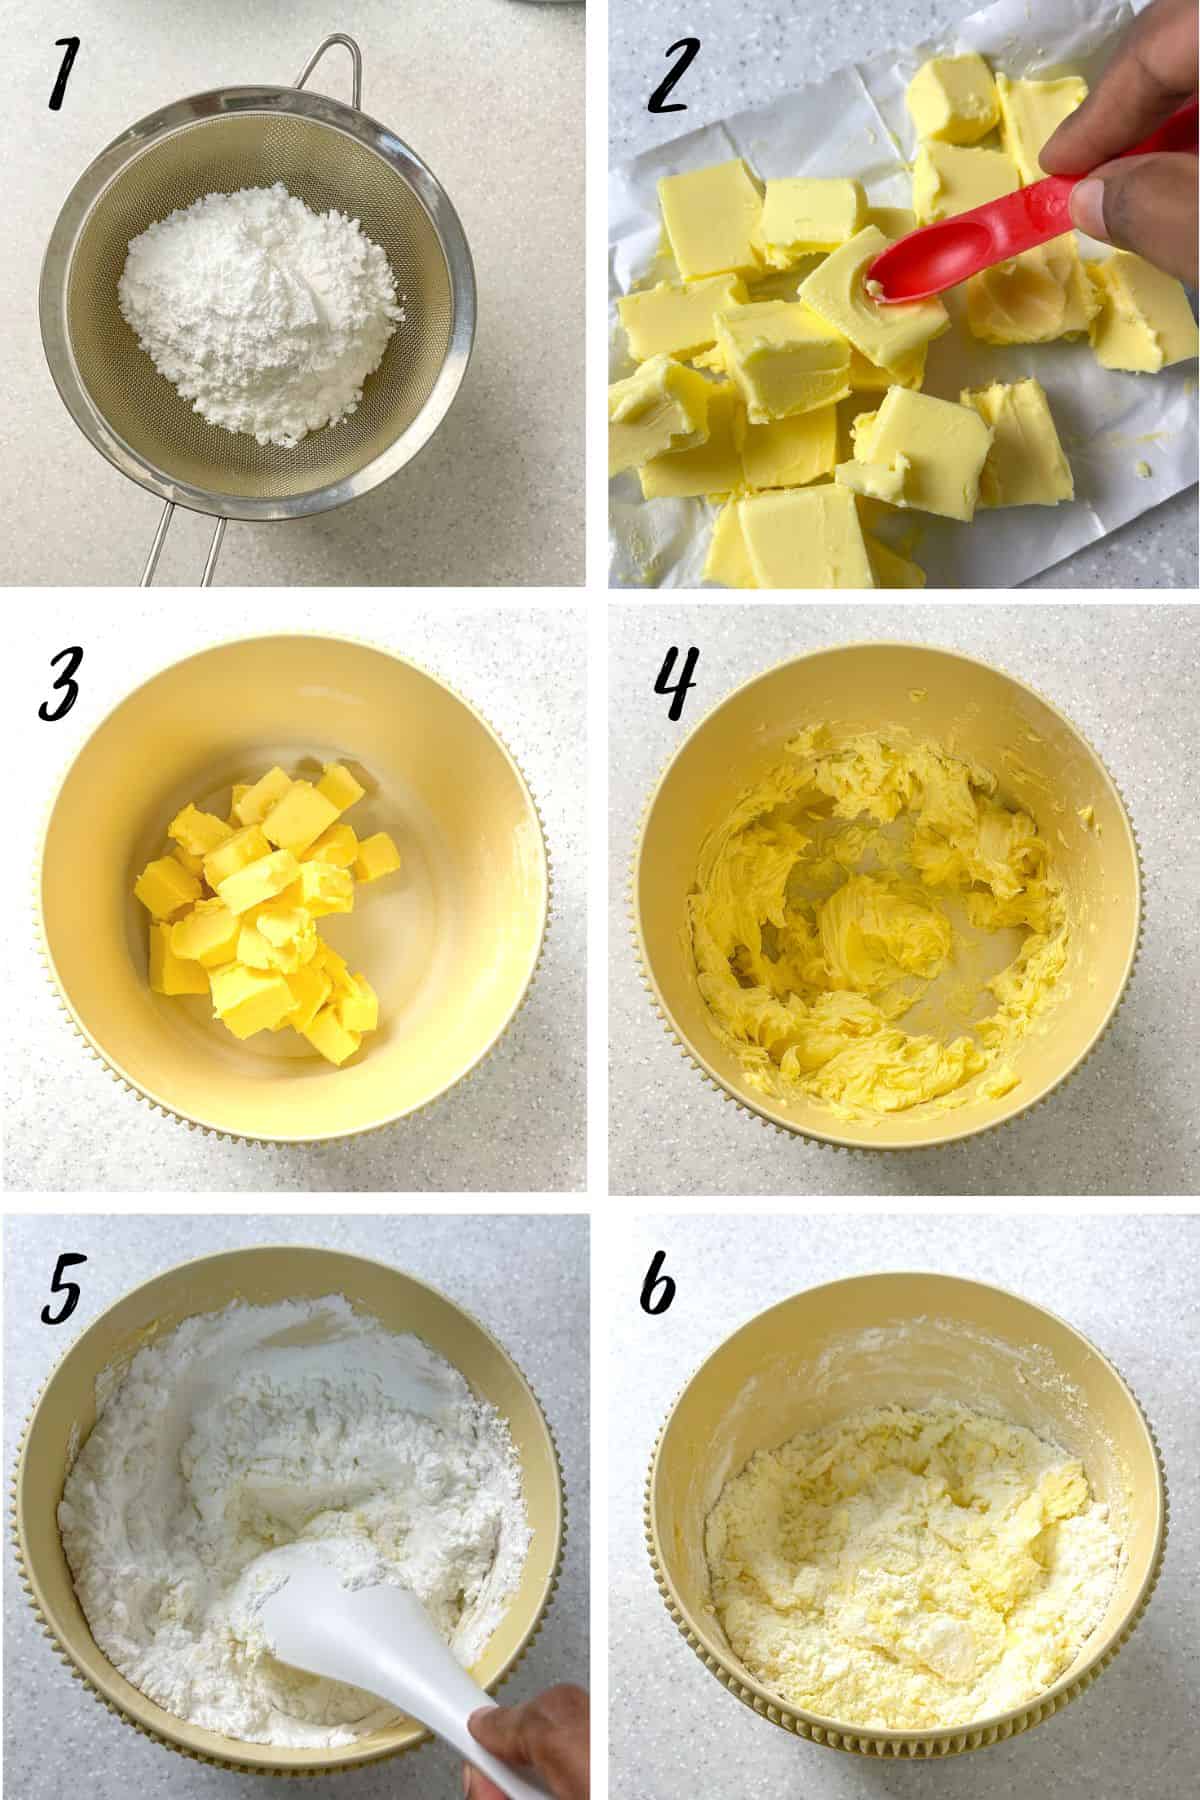 A poster of 6 images showing how to cream butter and powdered sugar to make buttercream icing.